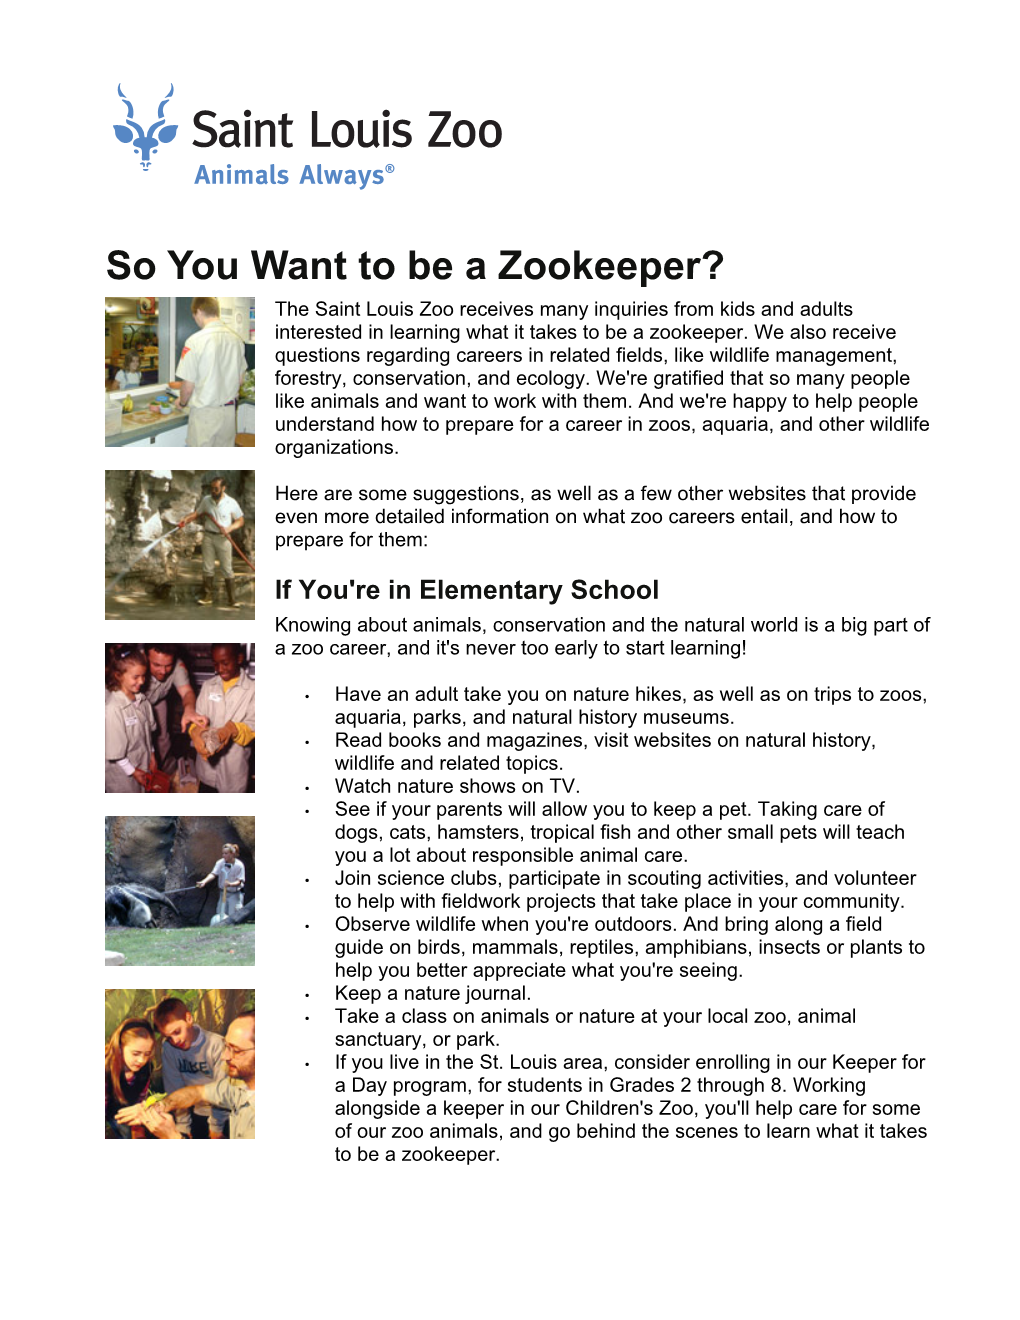 So You Want to Be a Zookeeper? the Saint Louis Zoo Receives Many Inquiries from Kids and Adults Interested in Learning What It Takes to Be a Zookeeper